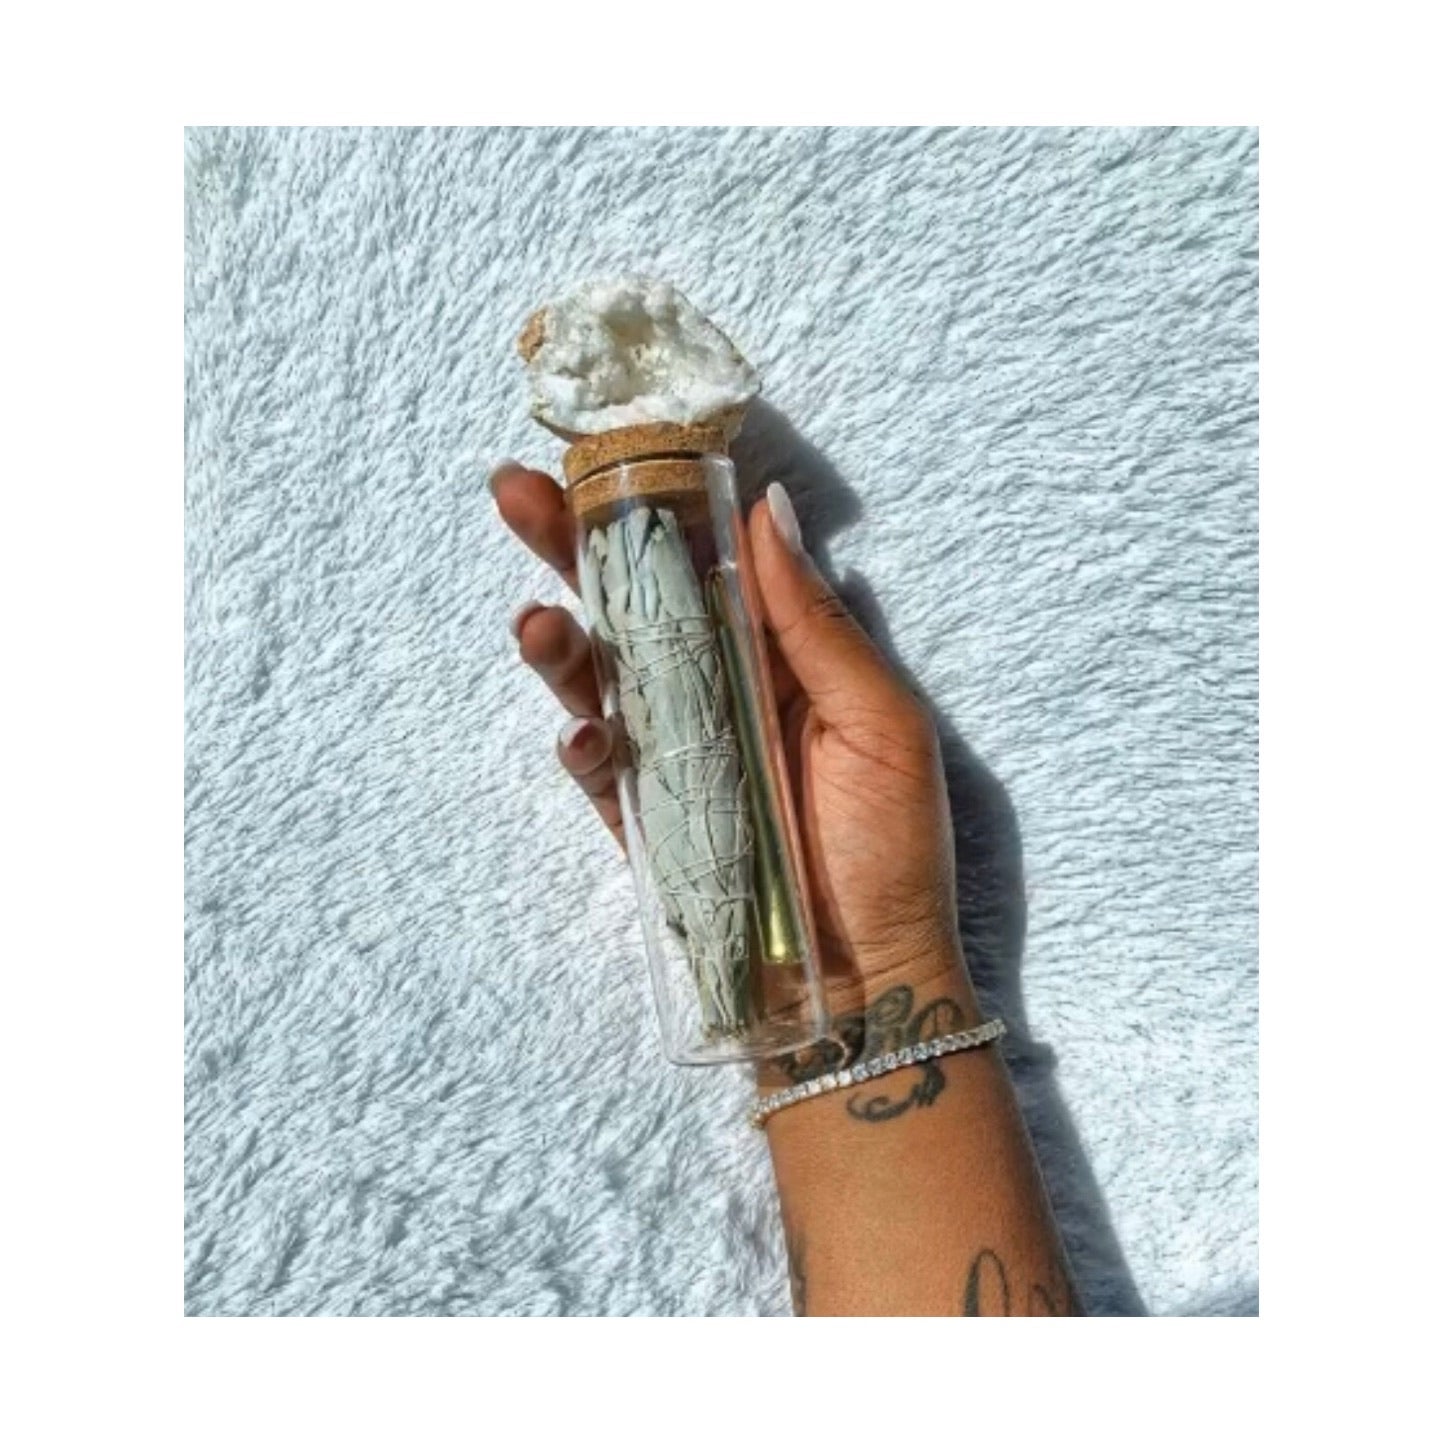 Clear and Bless Your Environment - Copal and Sage Clearing Stick, Palo Santo Incense, Rose Quartz, and a Golden Candle. All in a Beautiful Moroccan Geode Glass Jar!